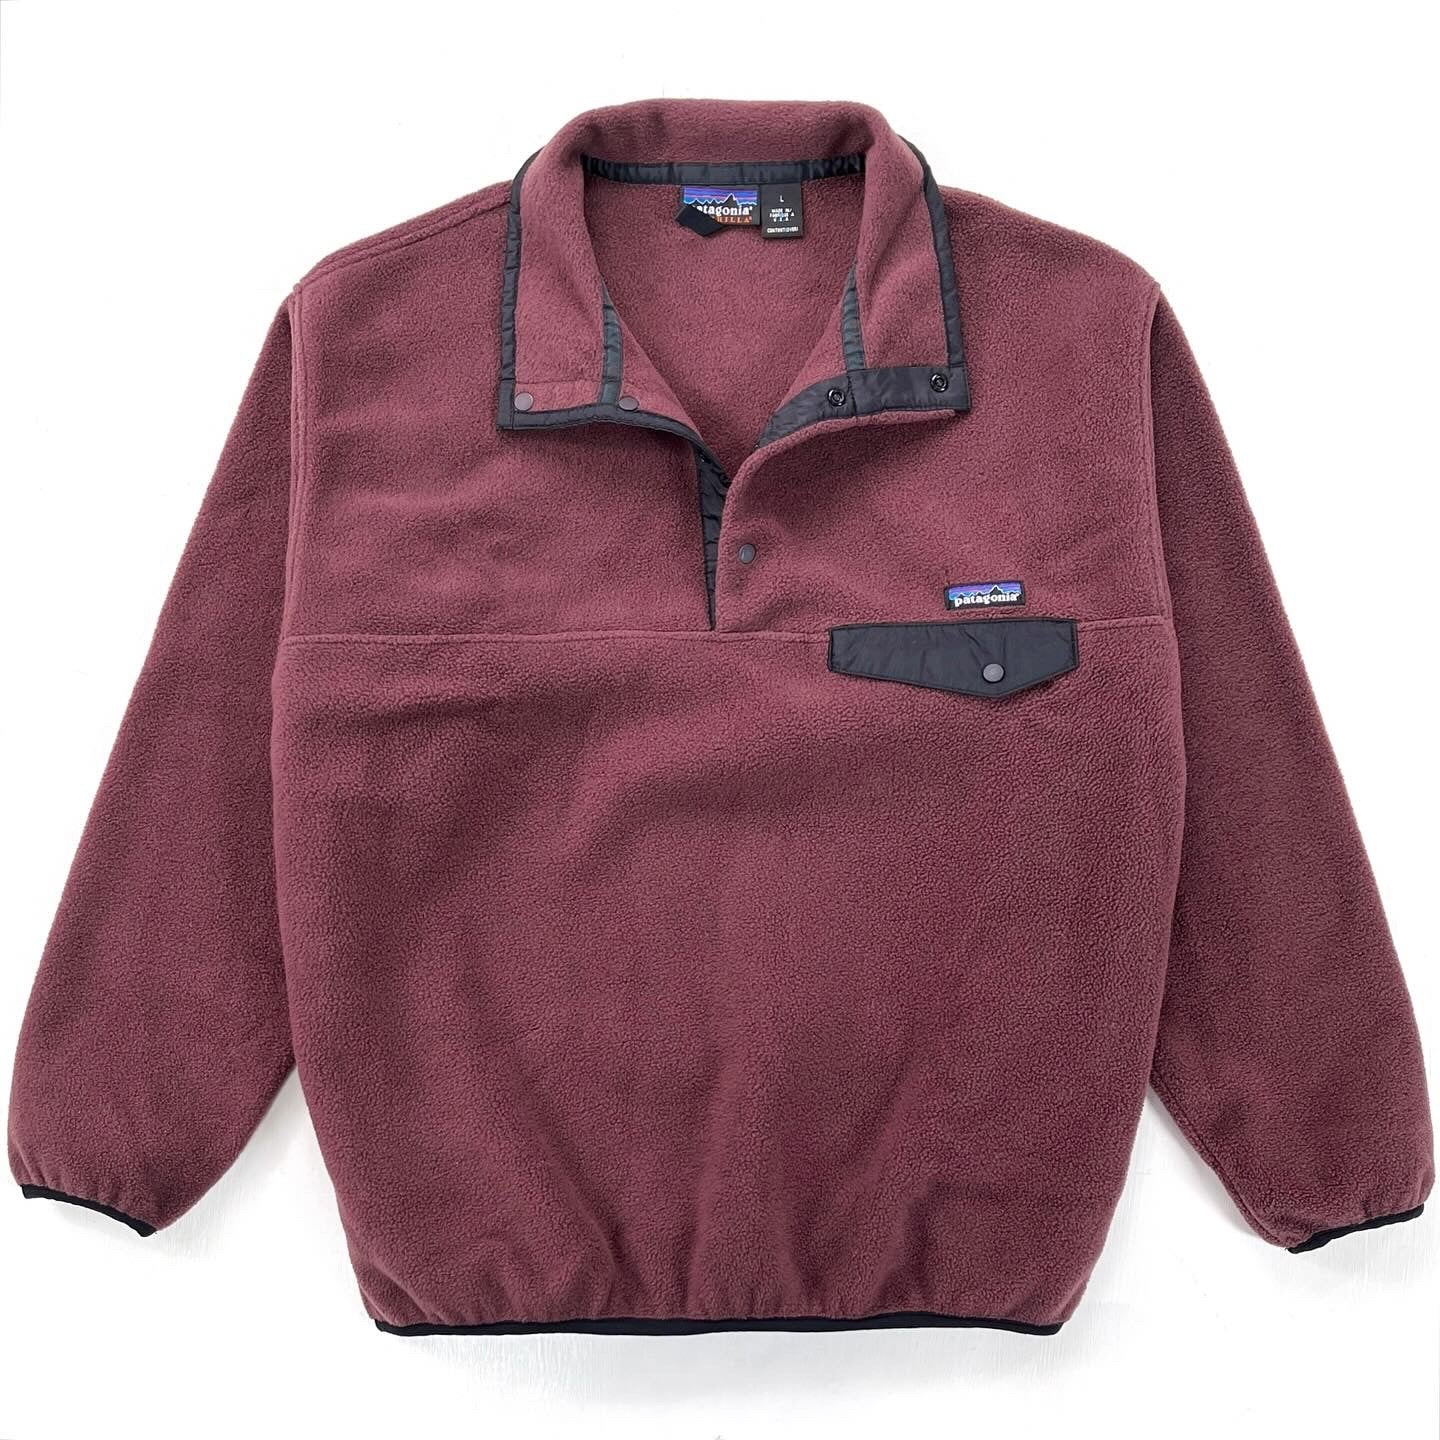 2001 Patagonia Made In The U.S.A. Synchilla Snap-T, Balsamic (L)